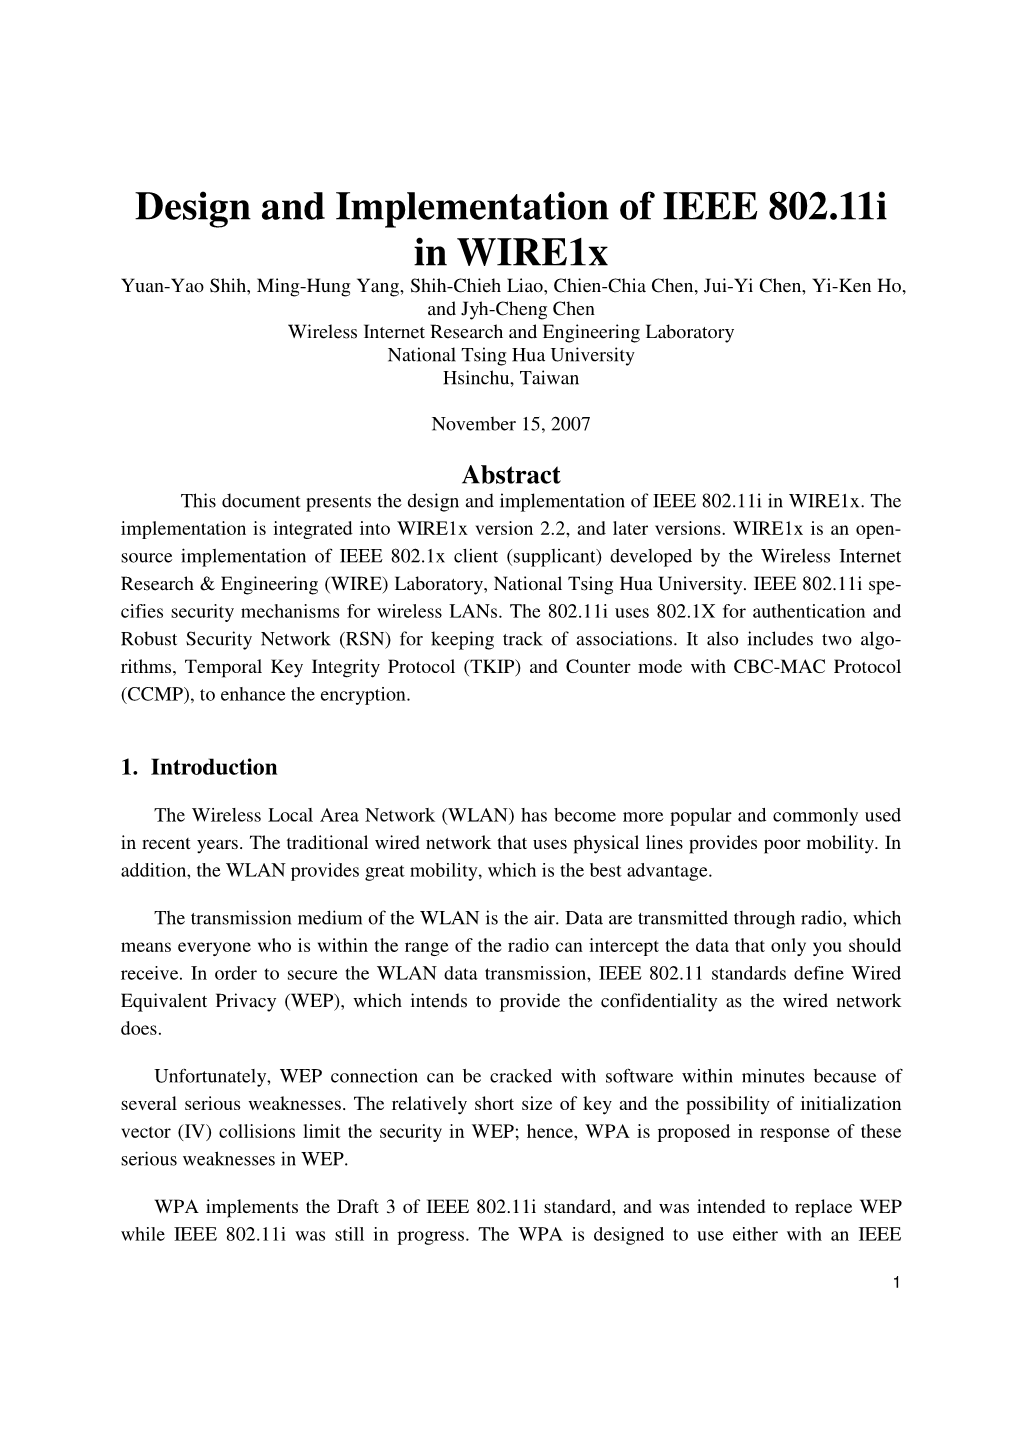 Design and Implementation of IEEE 802.11I in Wire1x